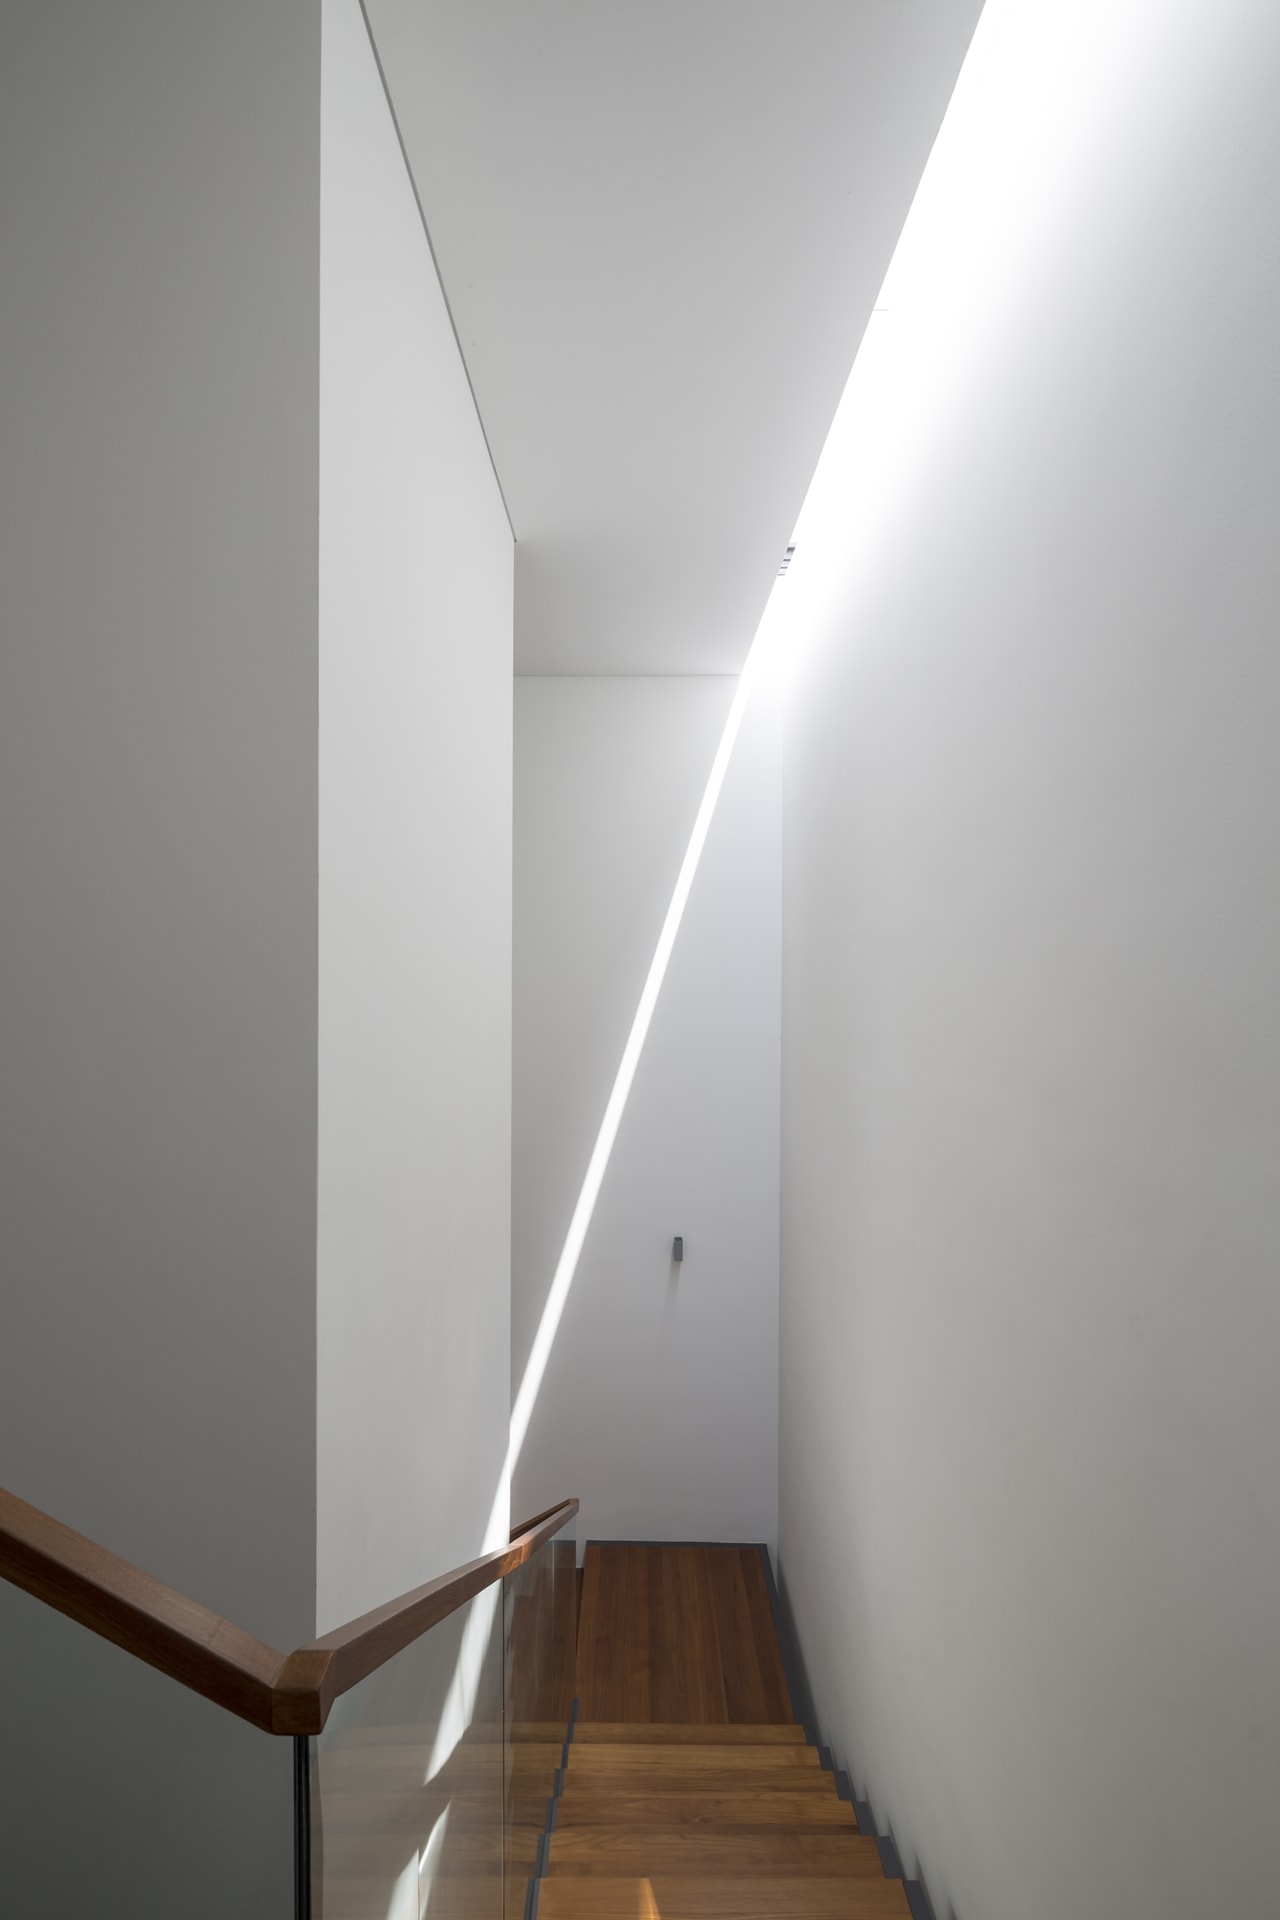 Hallway skylight in modern mansion designed by Wallflower Architecture and Design